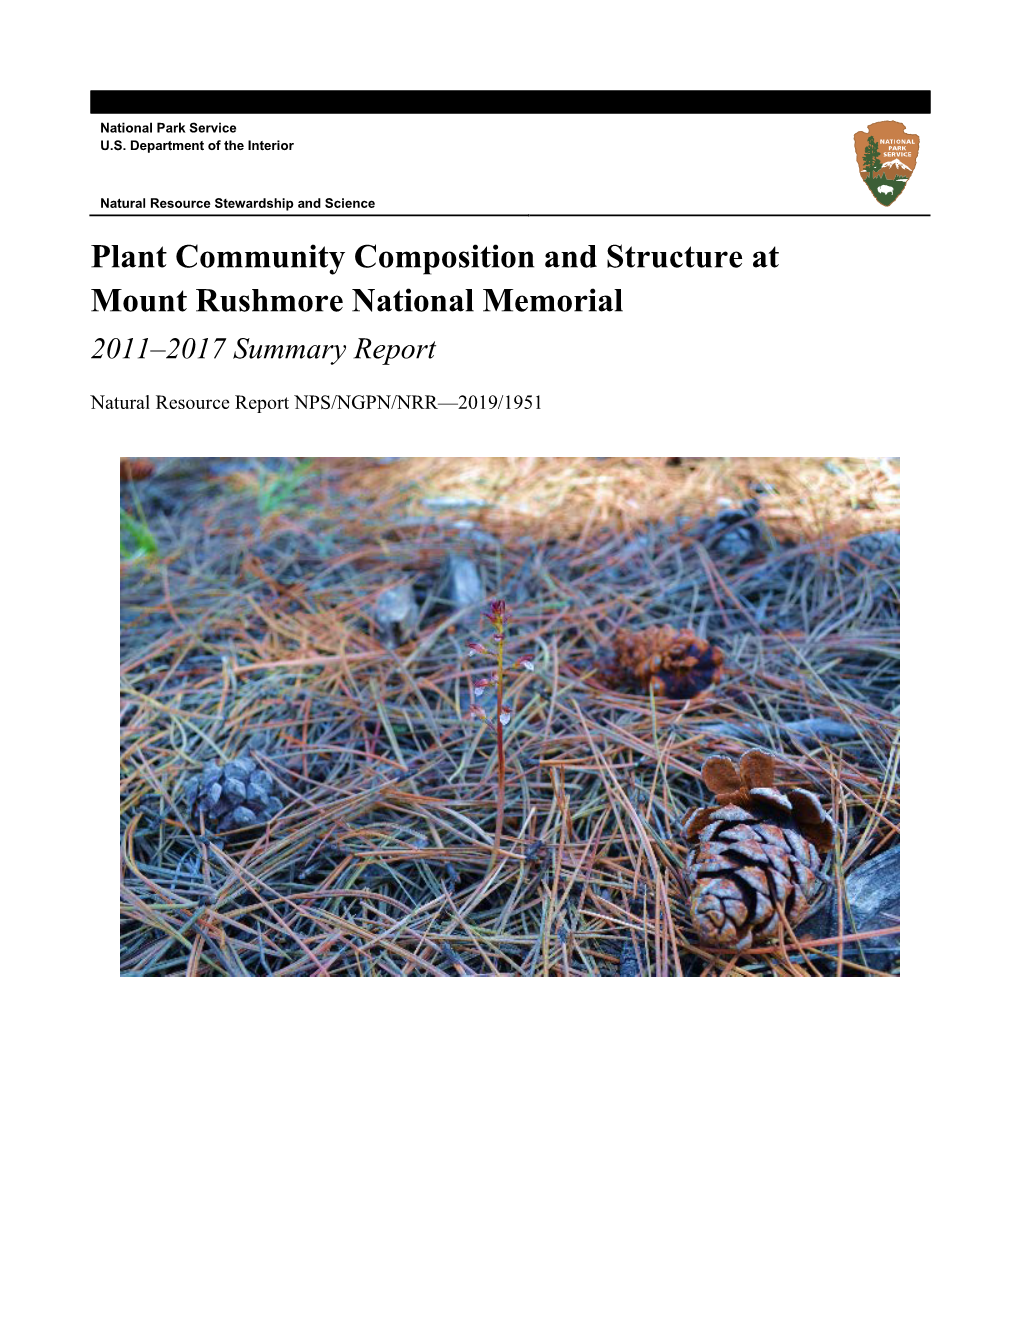 Plant Community Composition and Structure Monitoring at Mount Rushmore National Memorial: 2010- 2012 Status Report